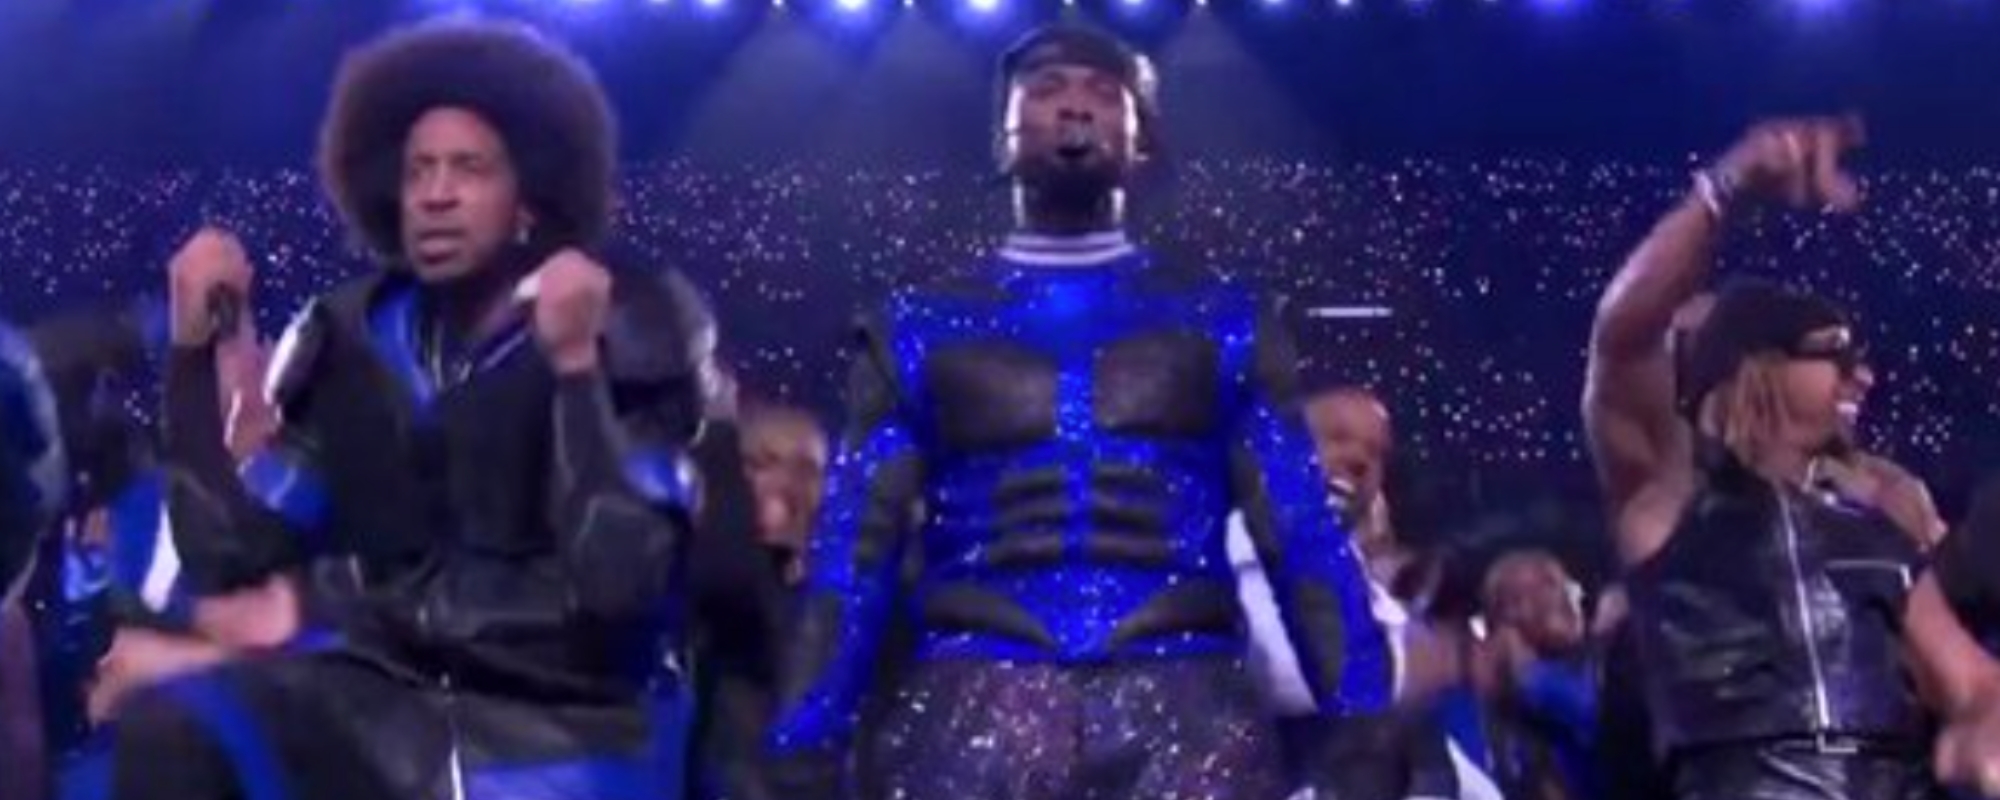 Fans Left Screaming “Yeah!” After Lil Jon and Ludacris Join Usher for Super Bowl Halftime Show